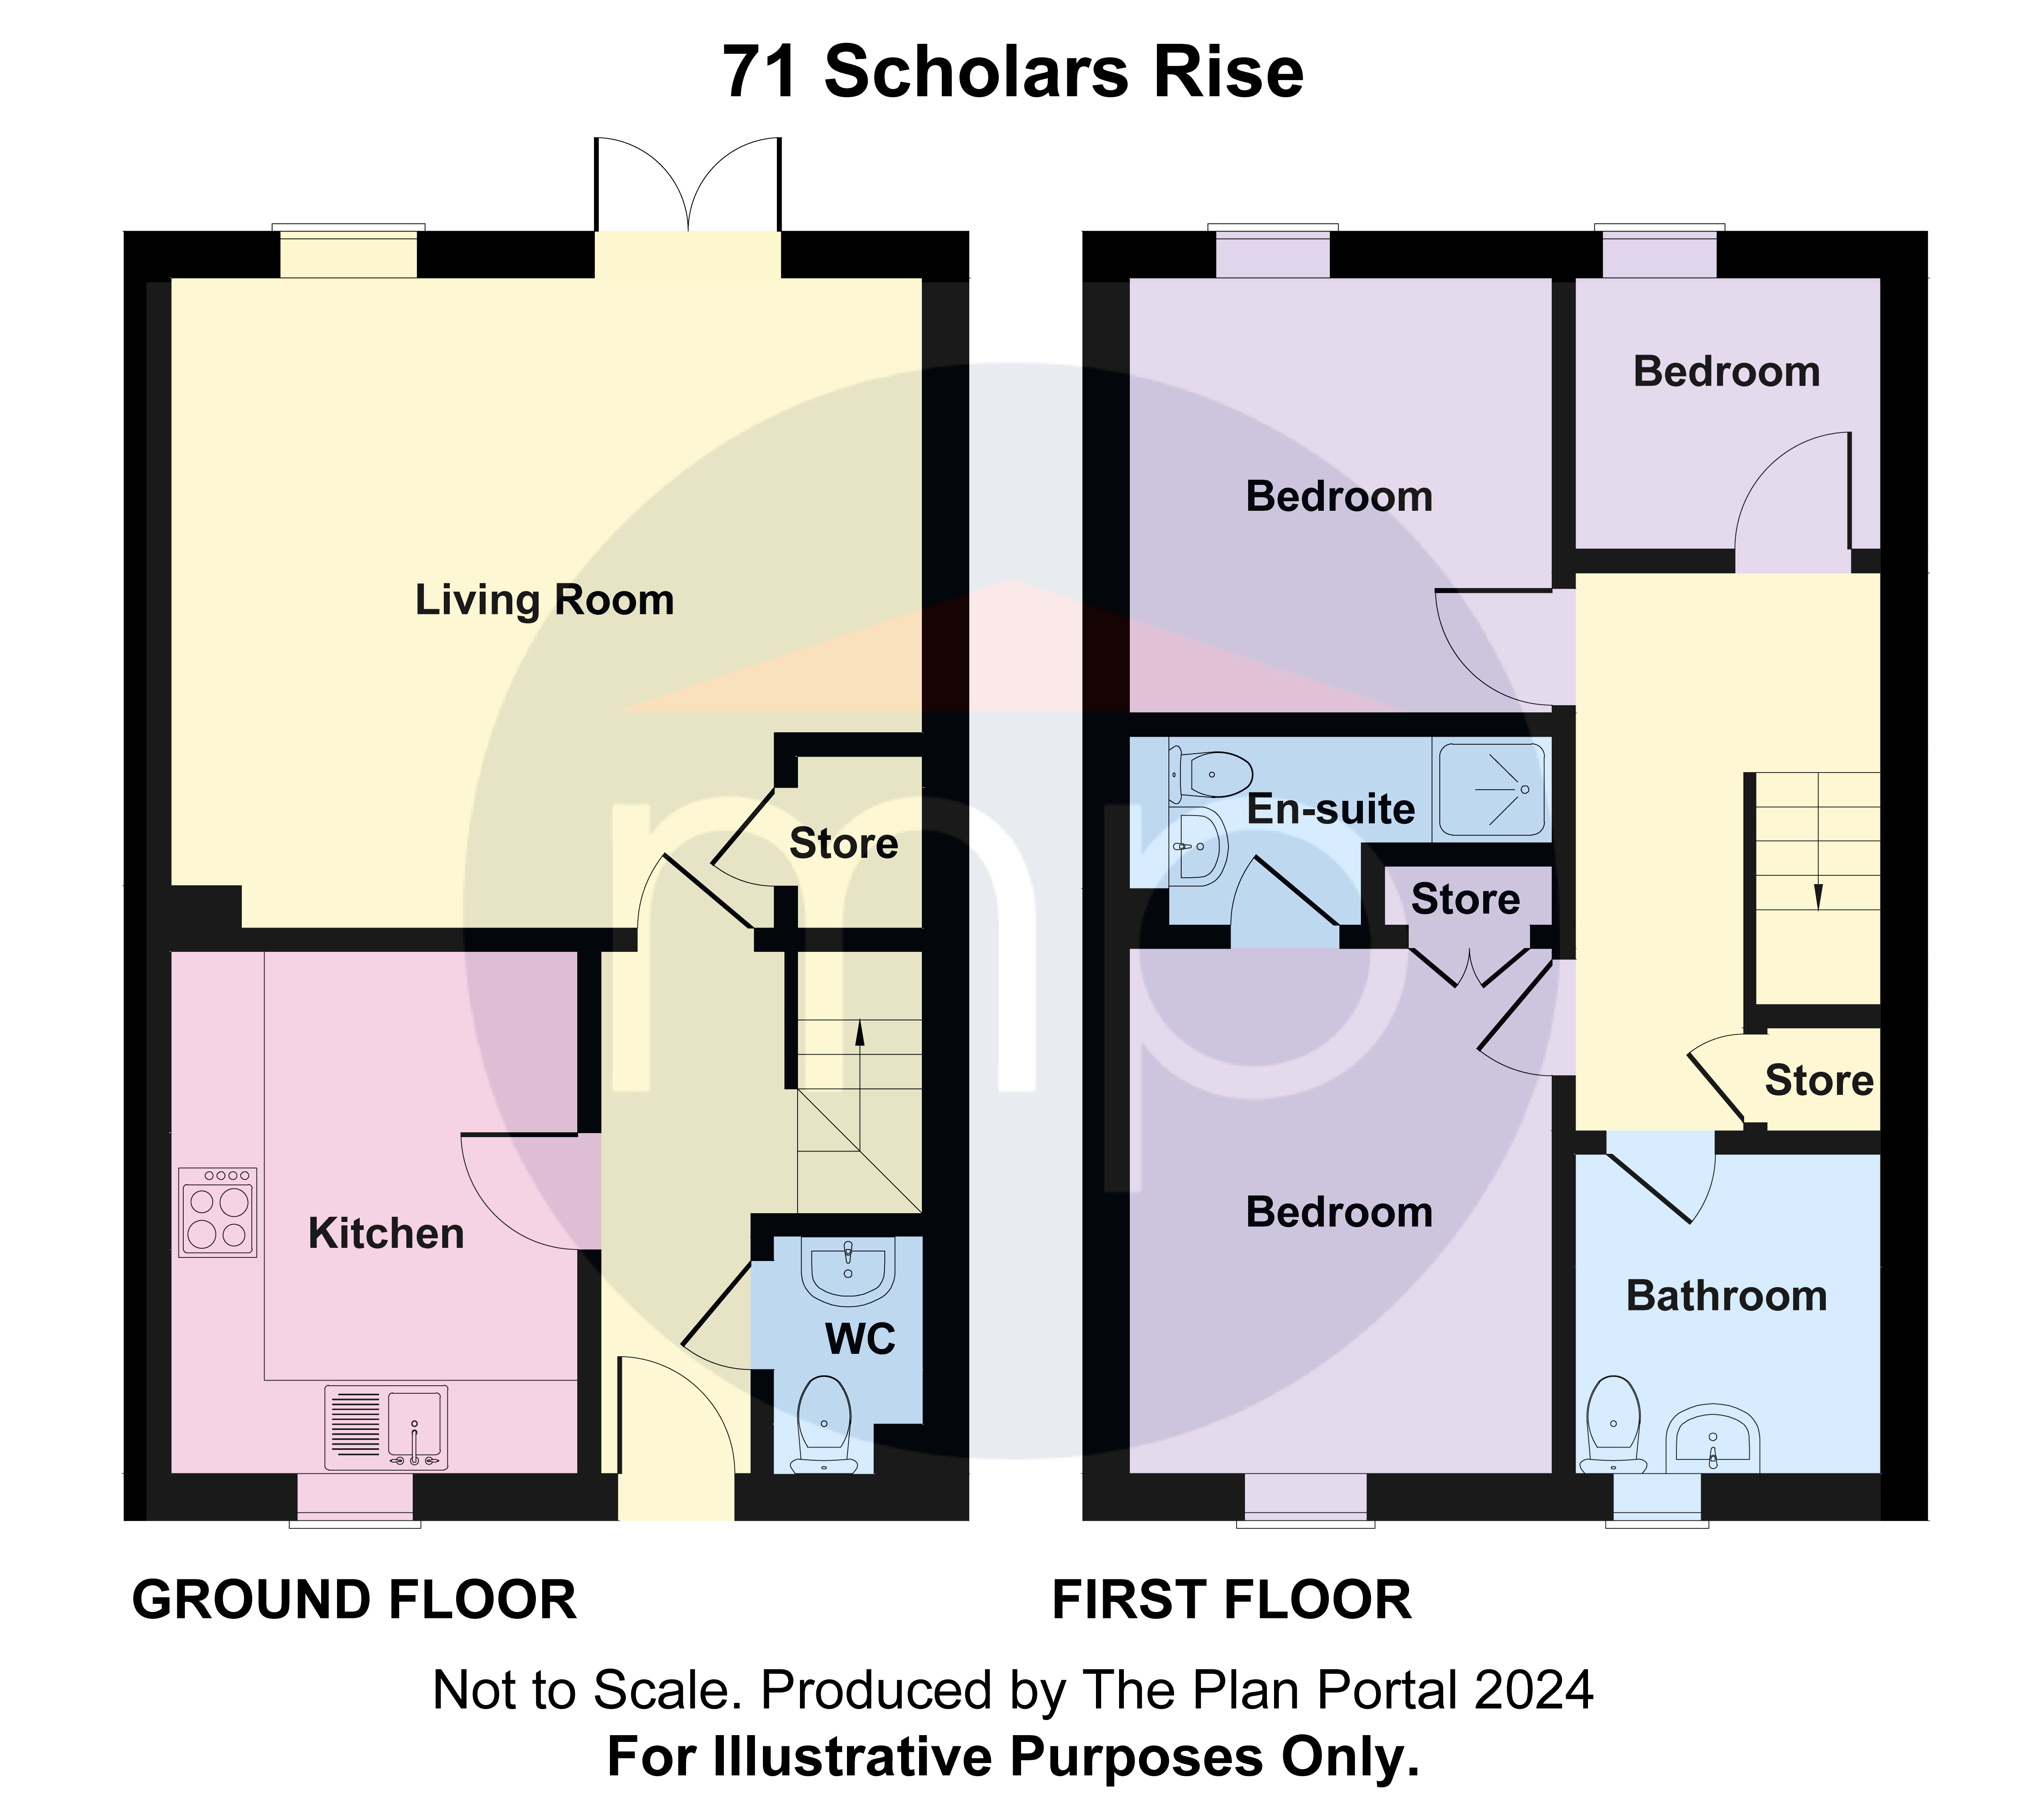 3 bed house for sale in Scholars Rise, The Oval - Property floorplan